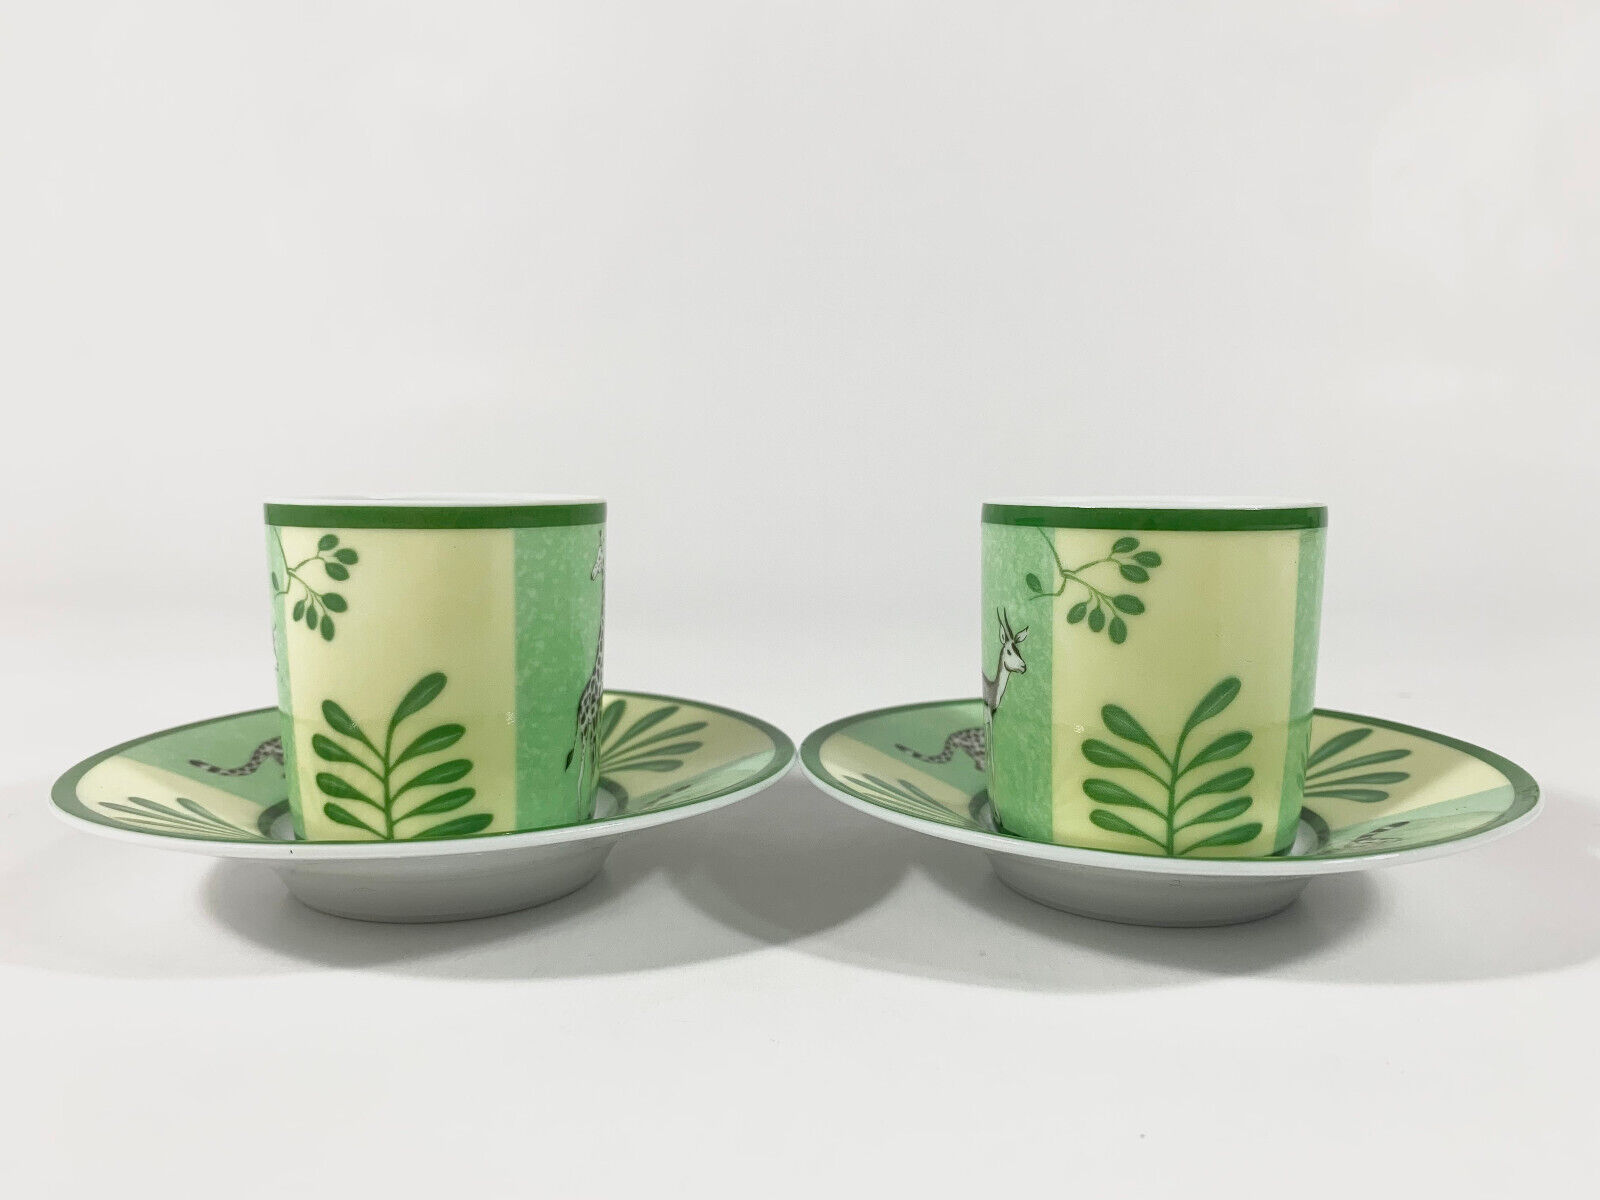 2x Hermes Africa Green Demitasse Espresso Coffee Cup and Saucer